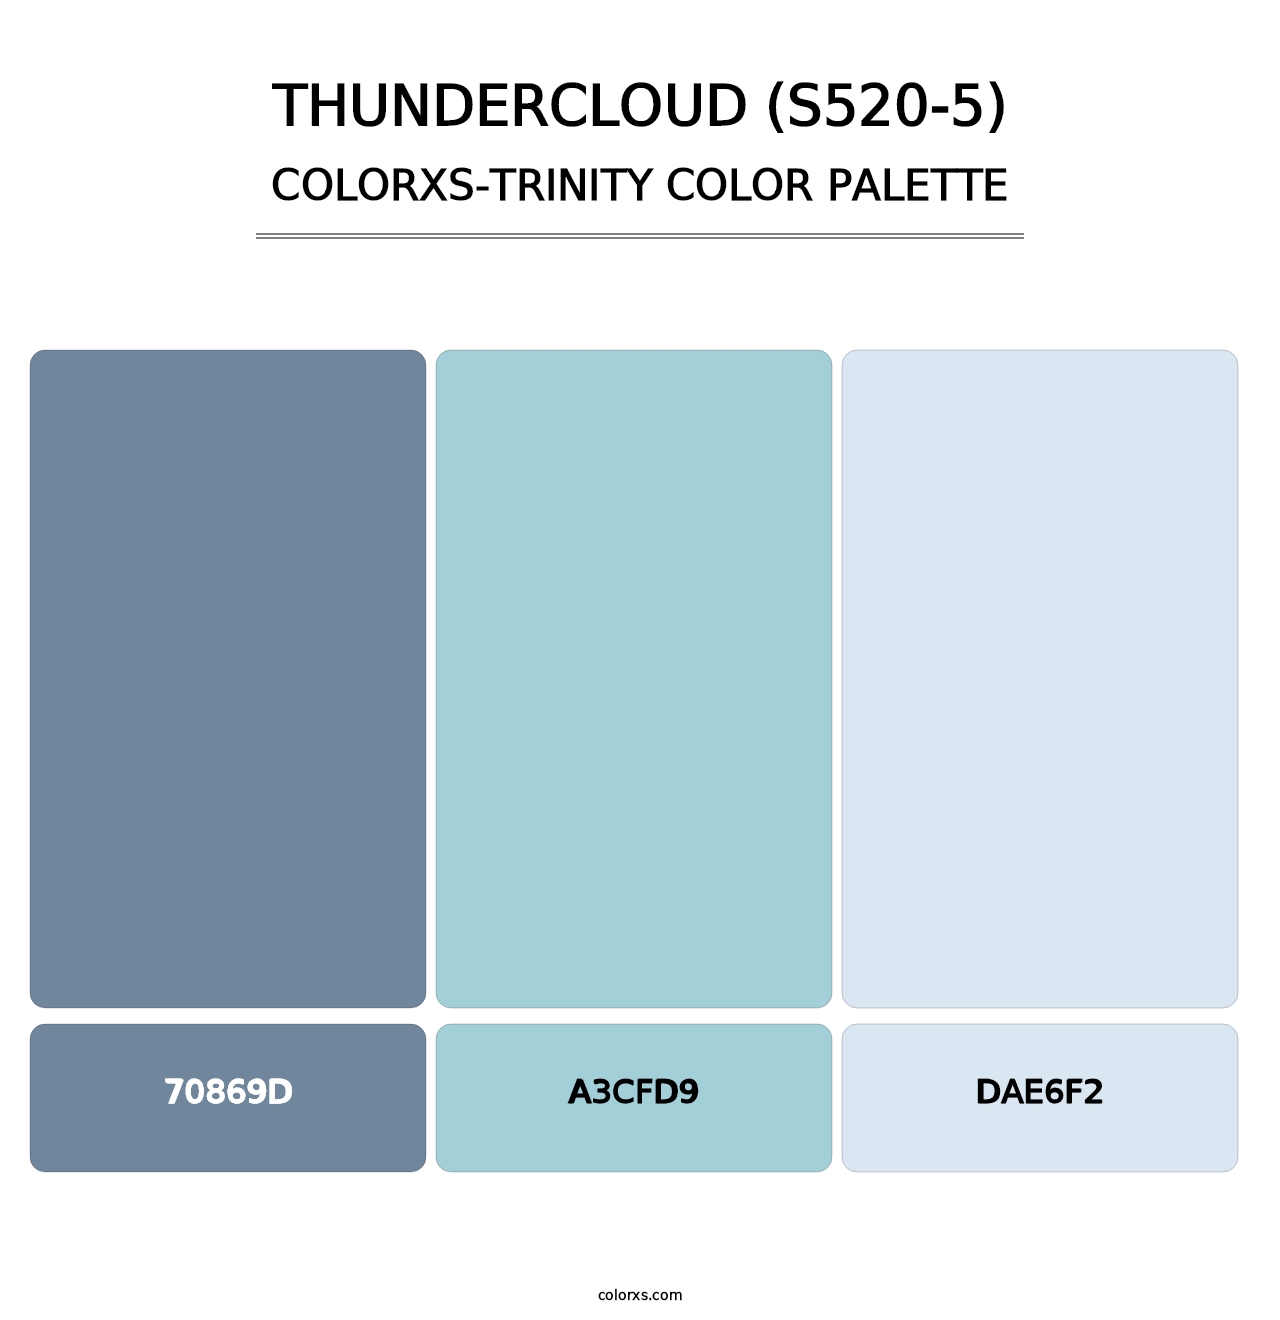 Thundercloud (S520-5) - Colorxs Trinity Palette